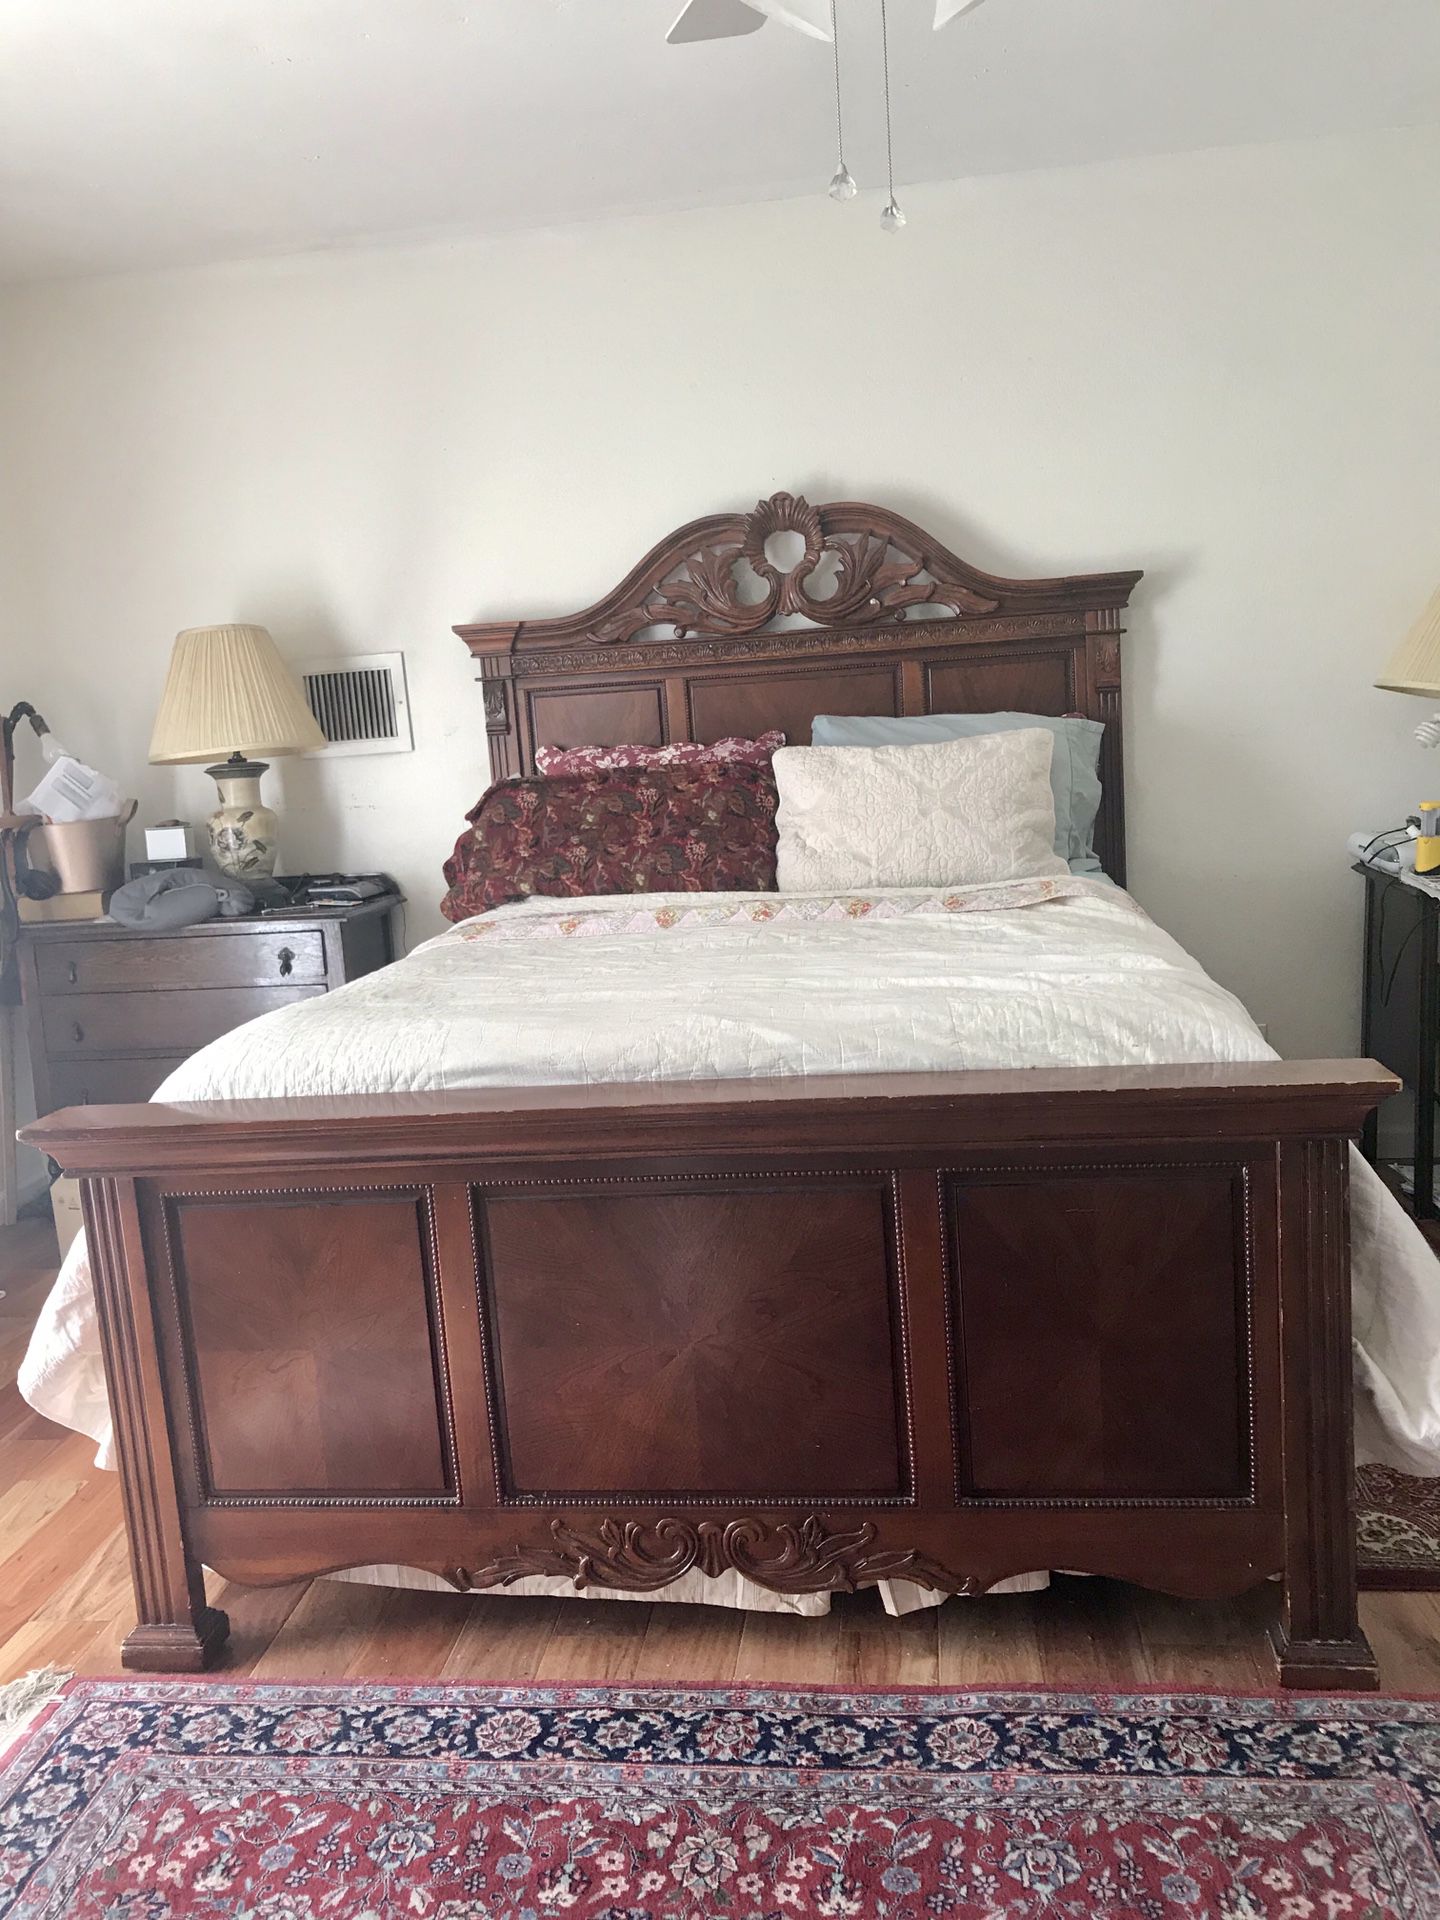 Queen Bed & Frame Set with Solid Wood Headboard/Footboard. Mattress cover, Sheets included